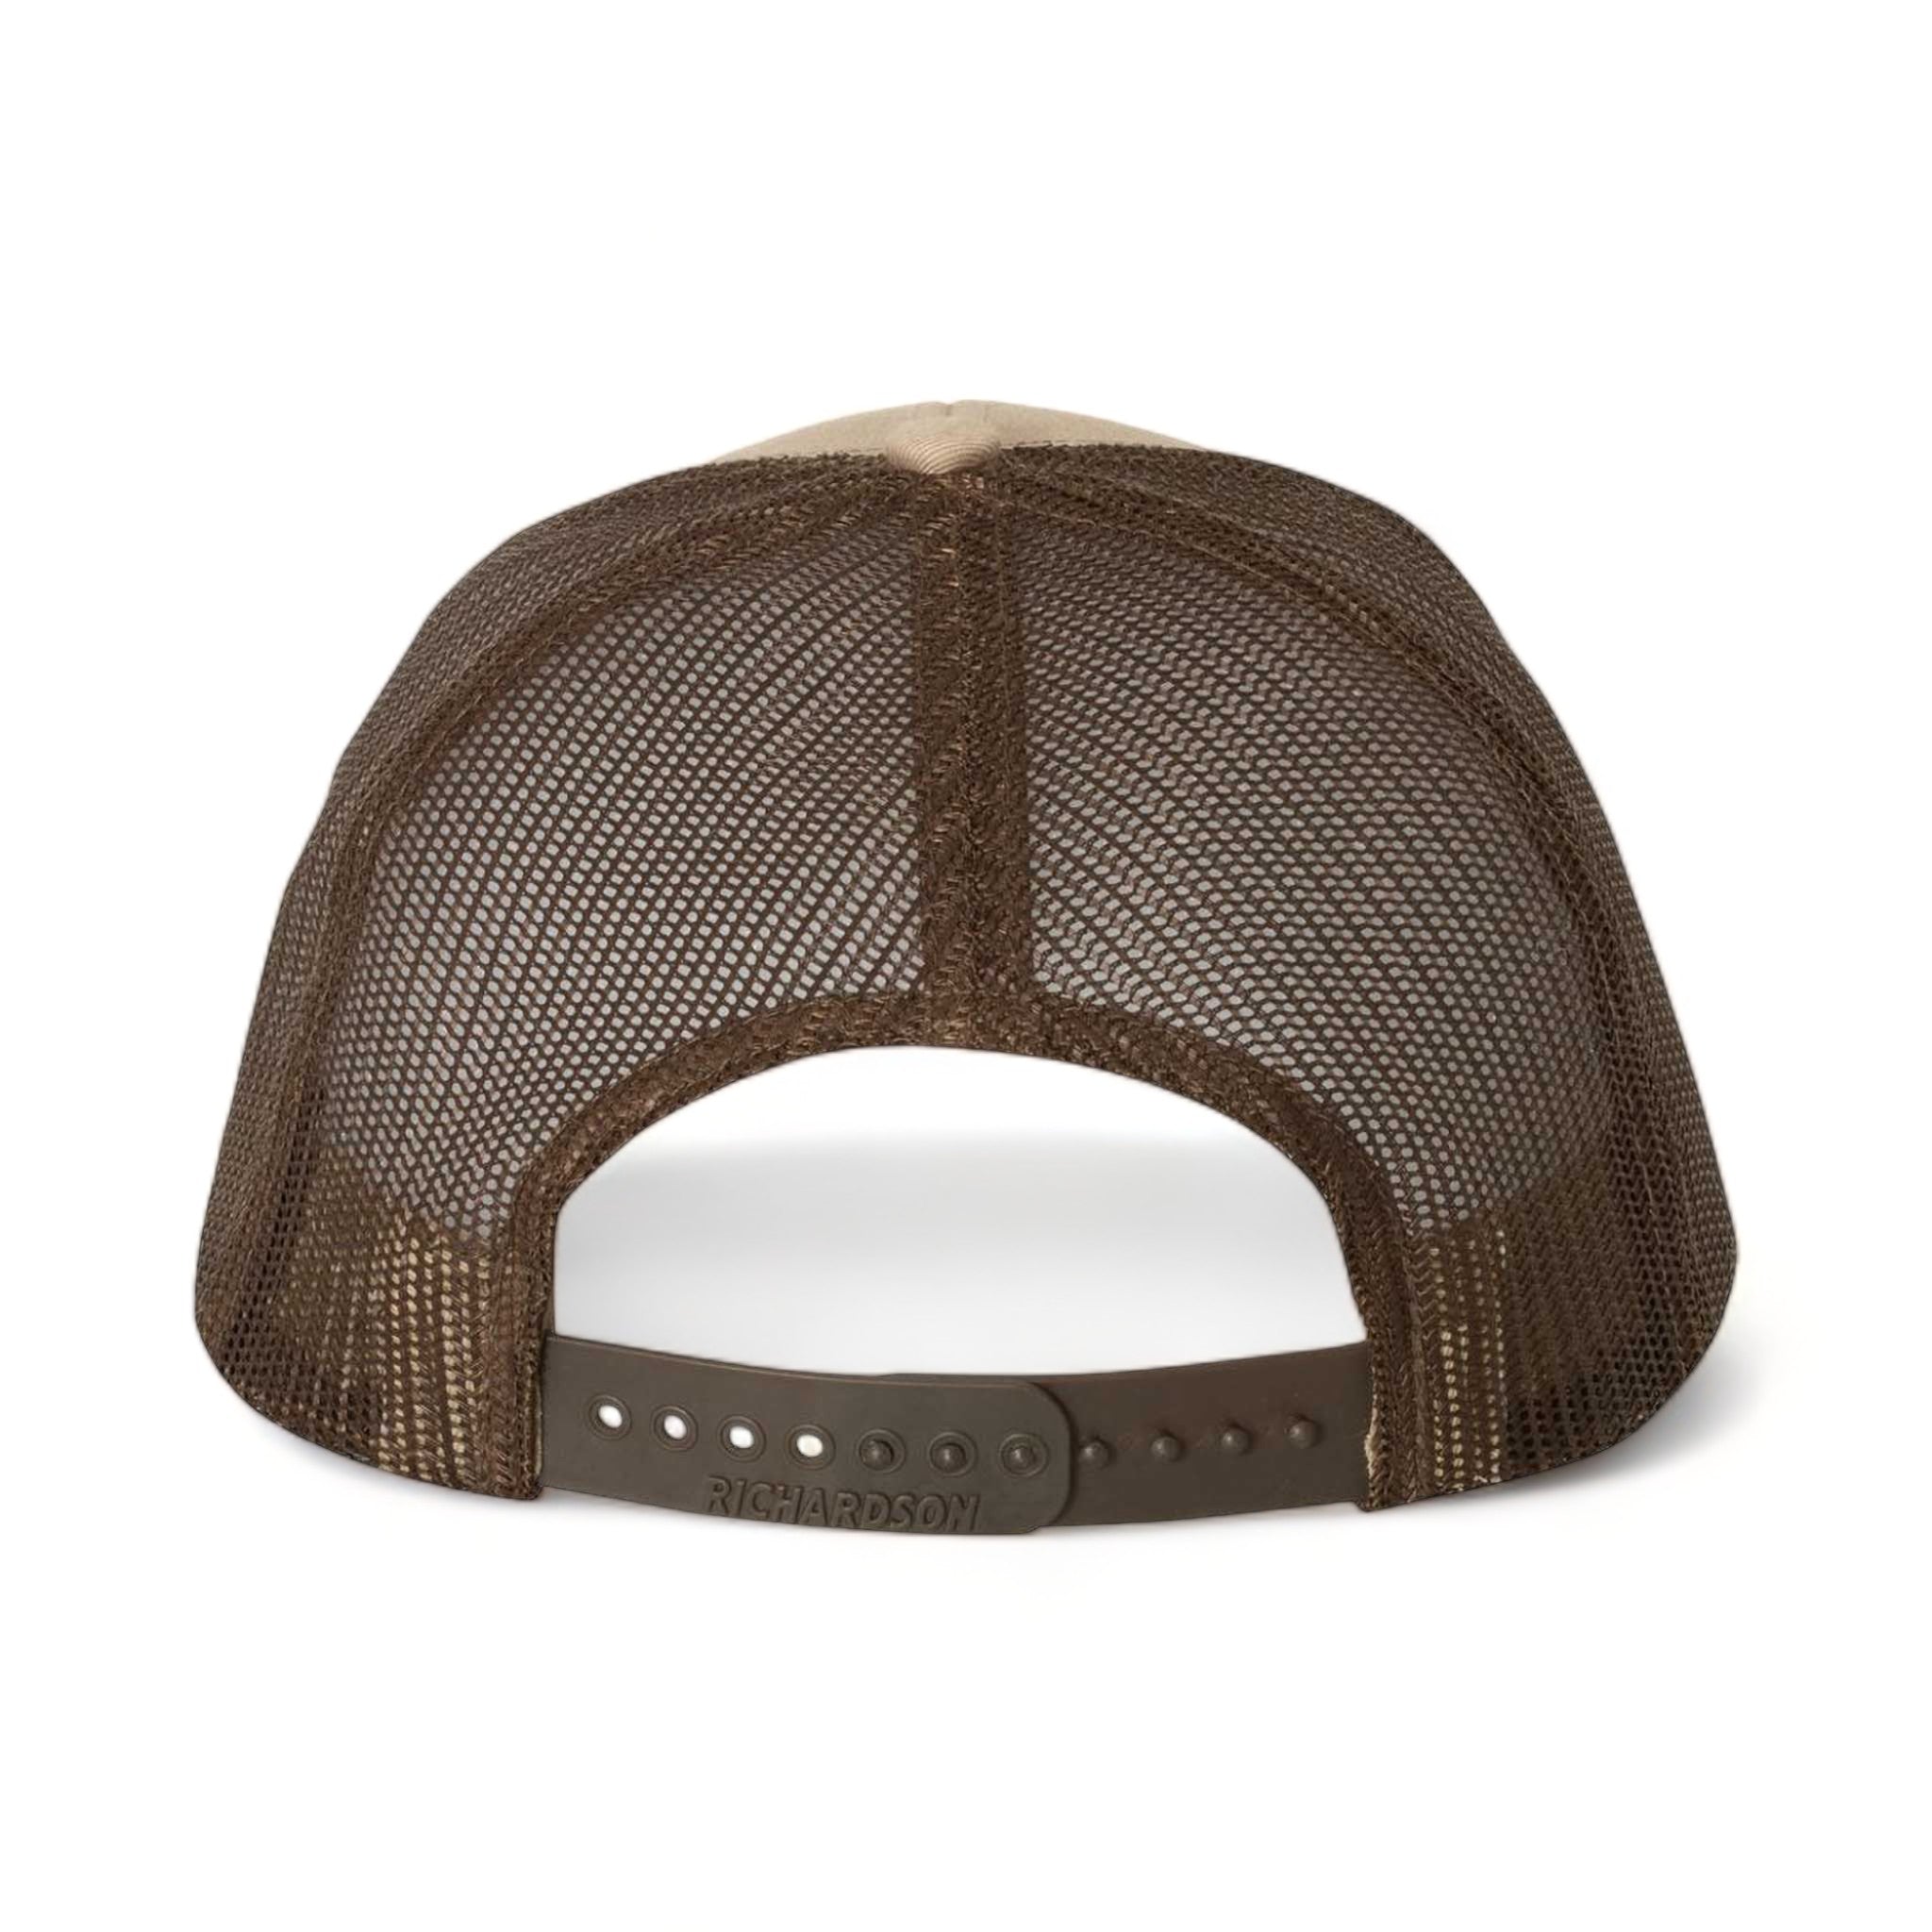 Back view of Richardson 112 custom hat in khaki and coffee